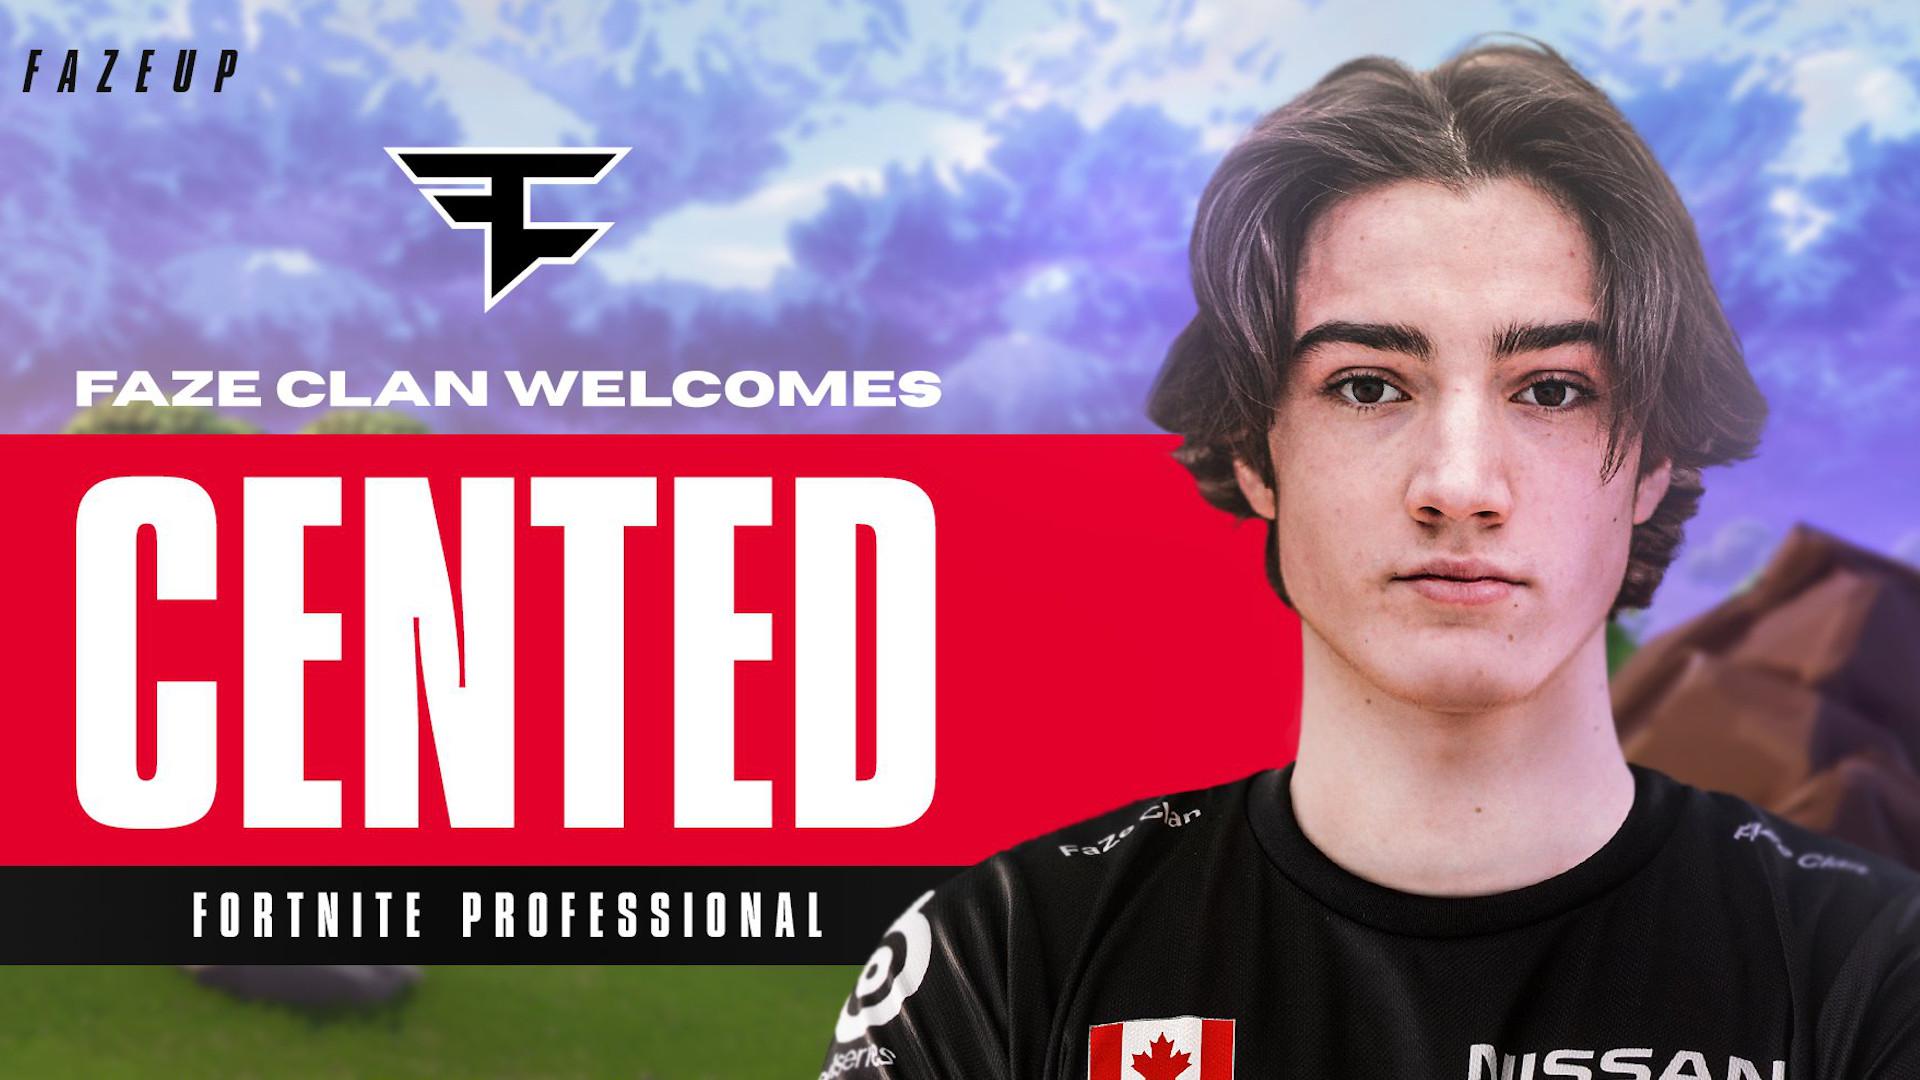 Faze Clan Sign Cented To Fortnite Roster Dexerto